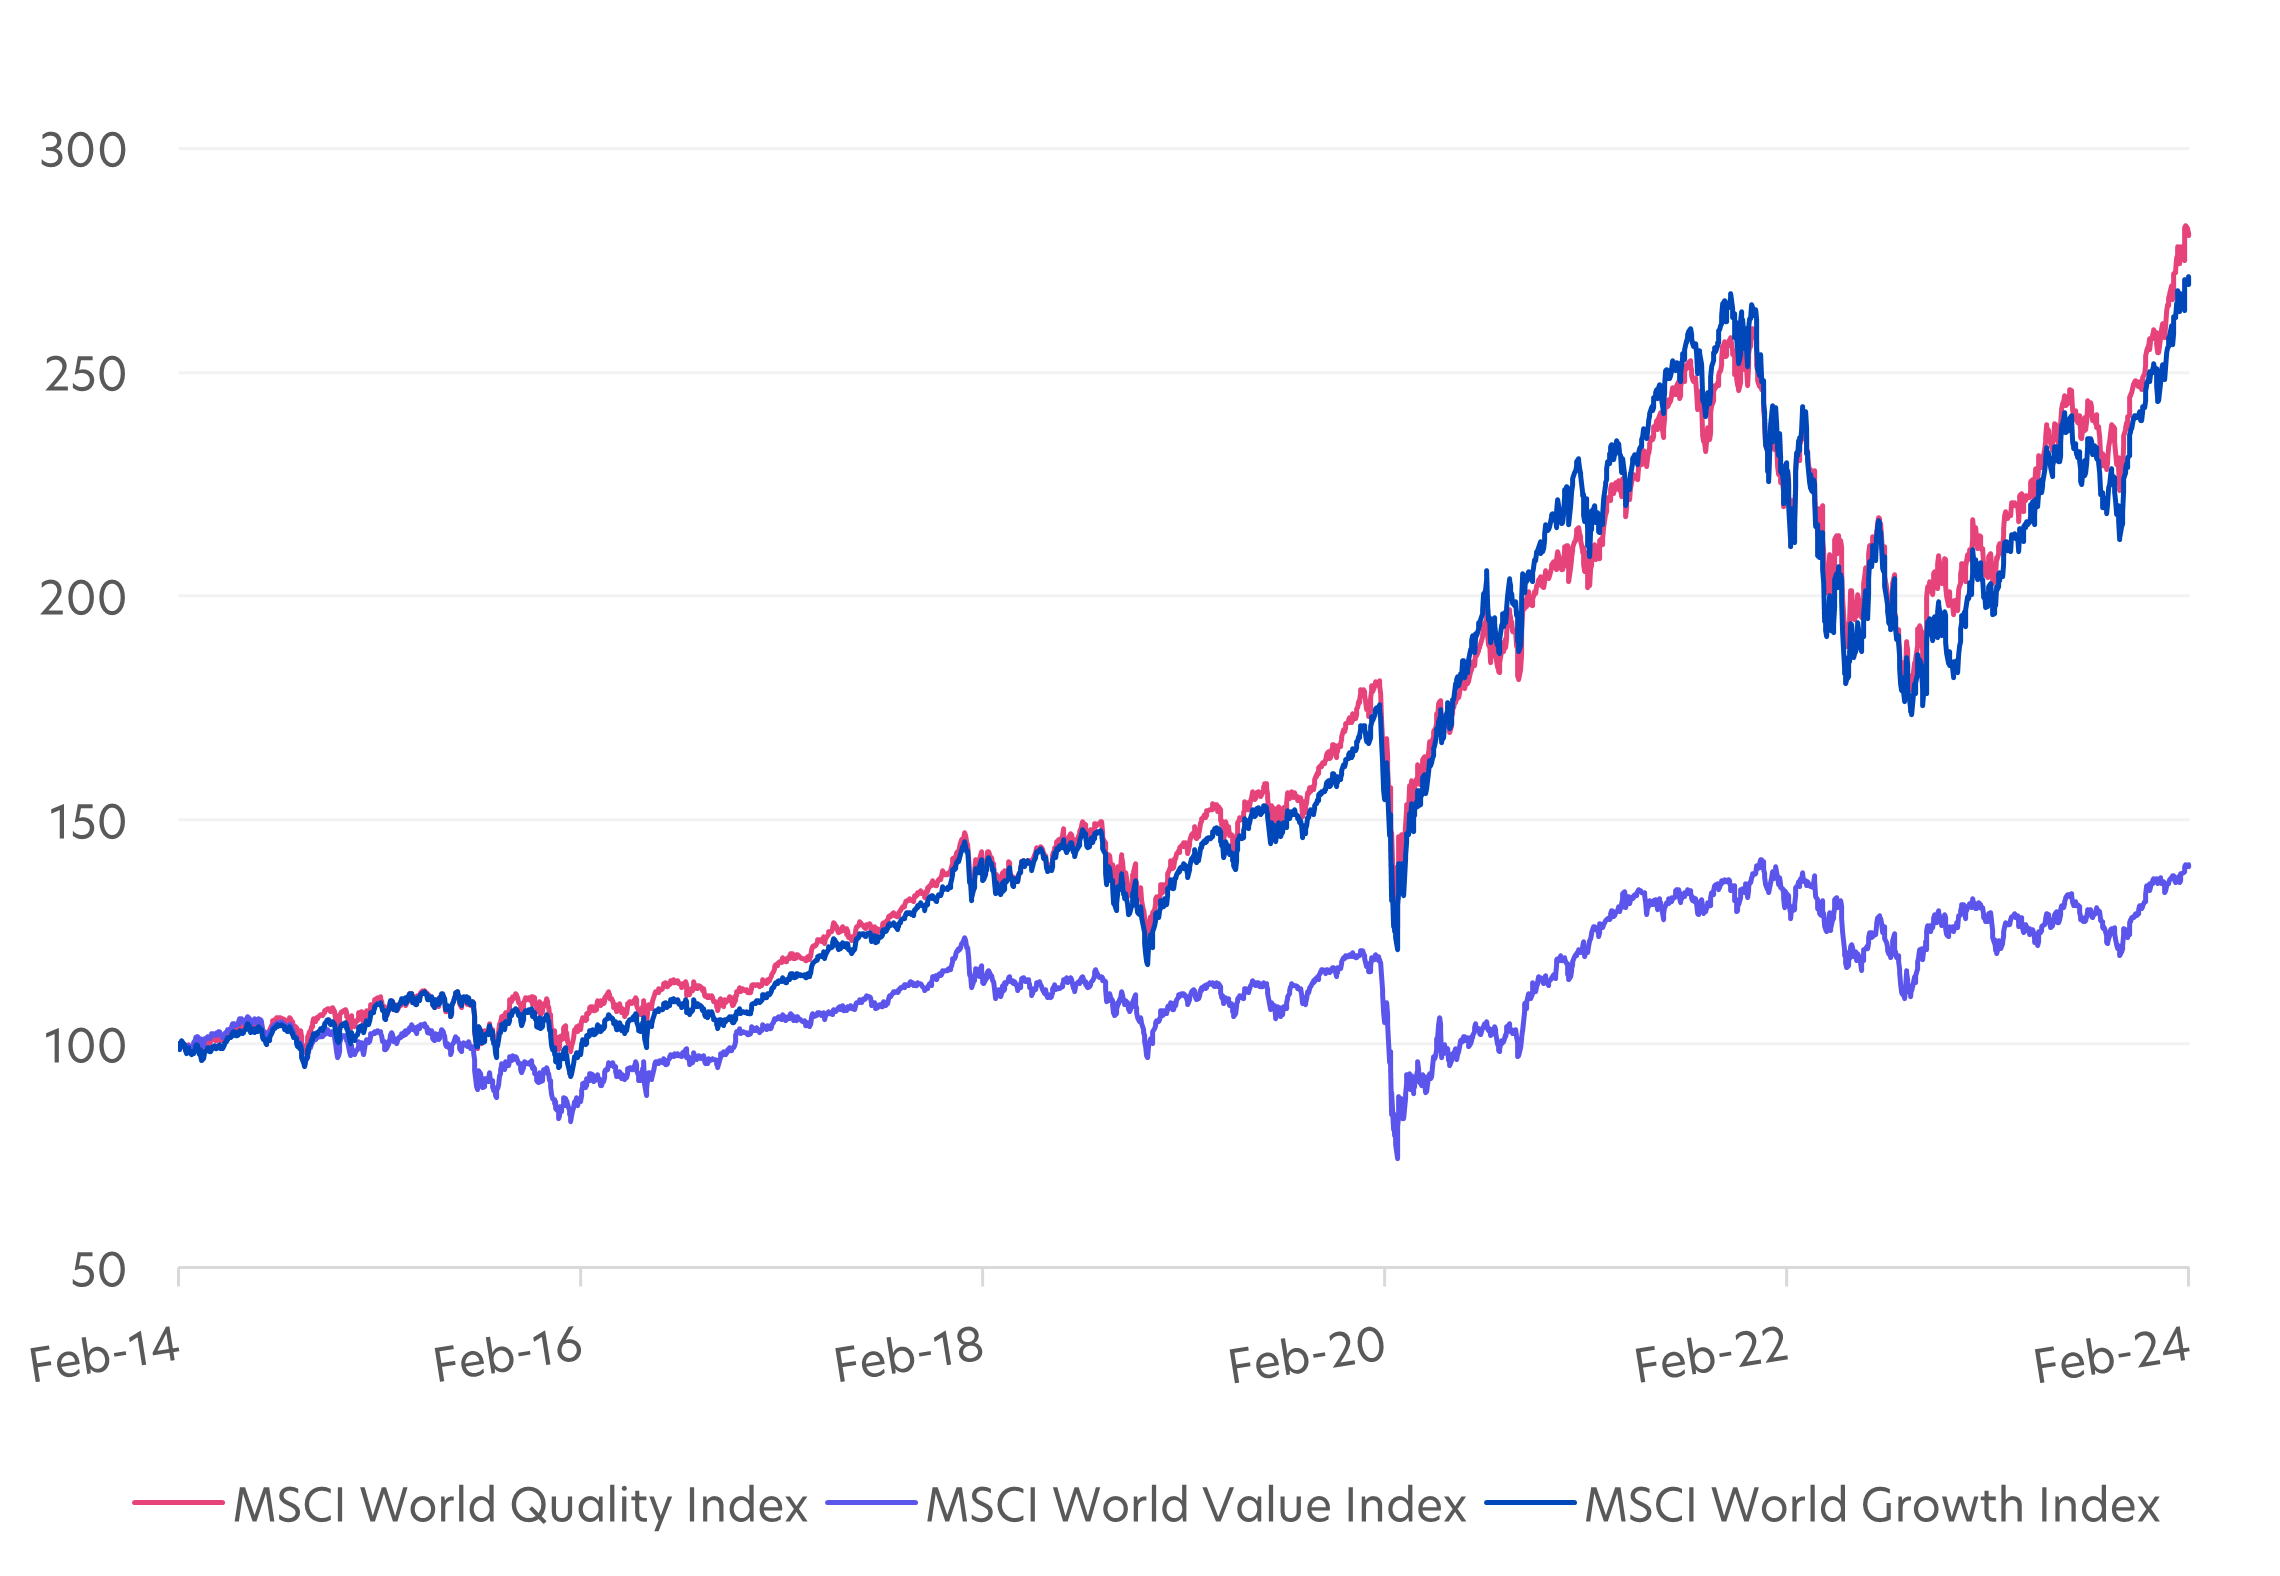 Fig 2: Quality vs growth and value indices, Feb 2014 – Feb 2024